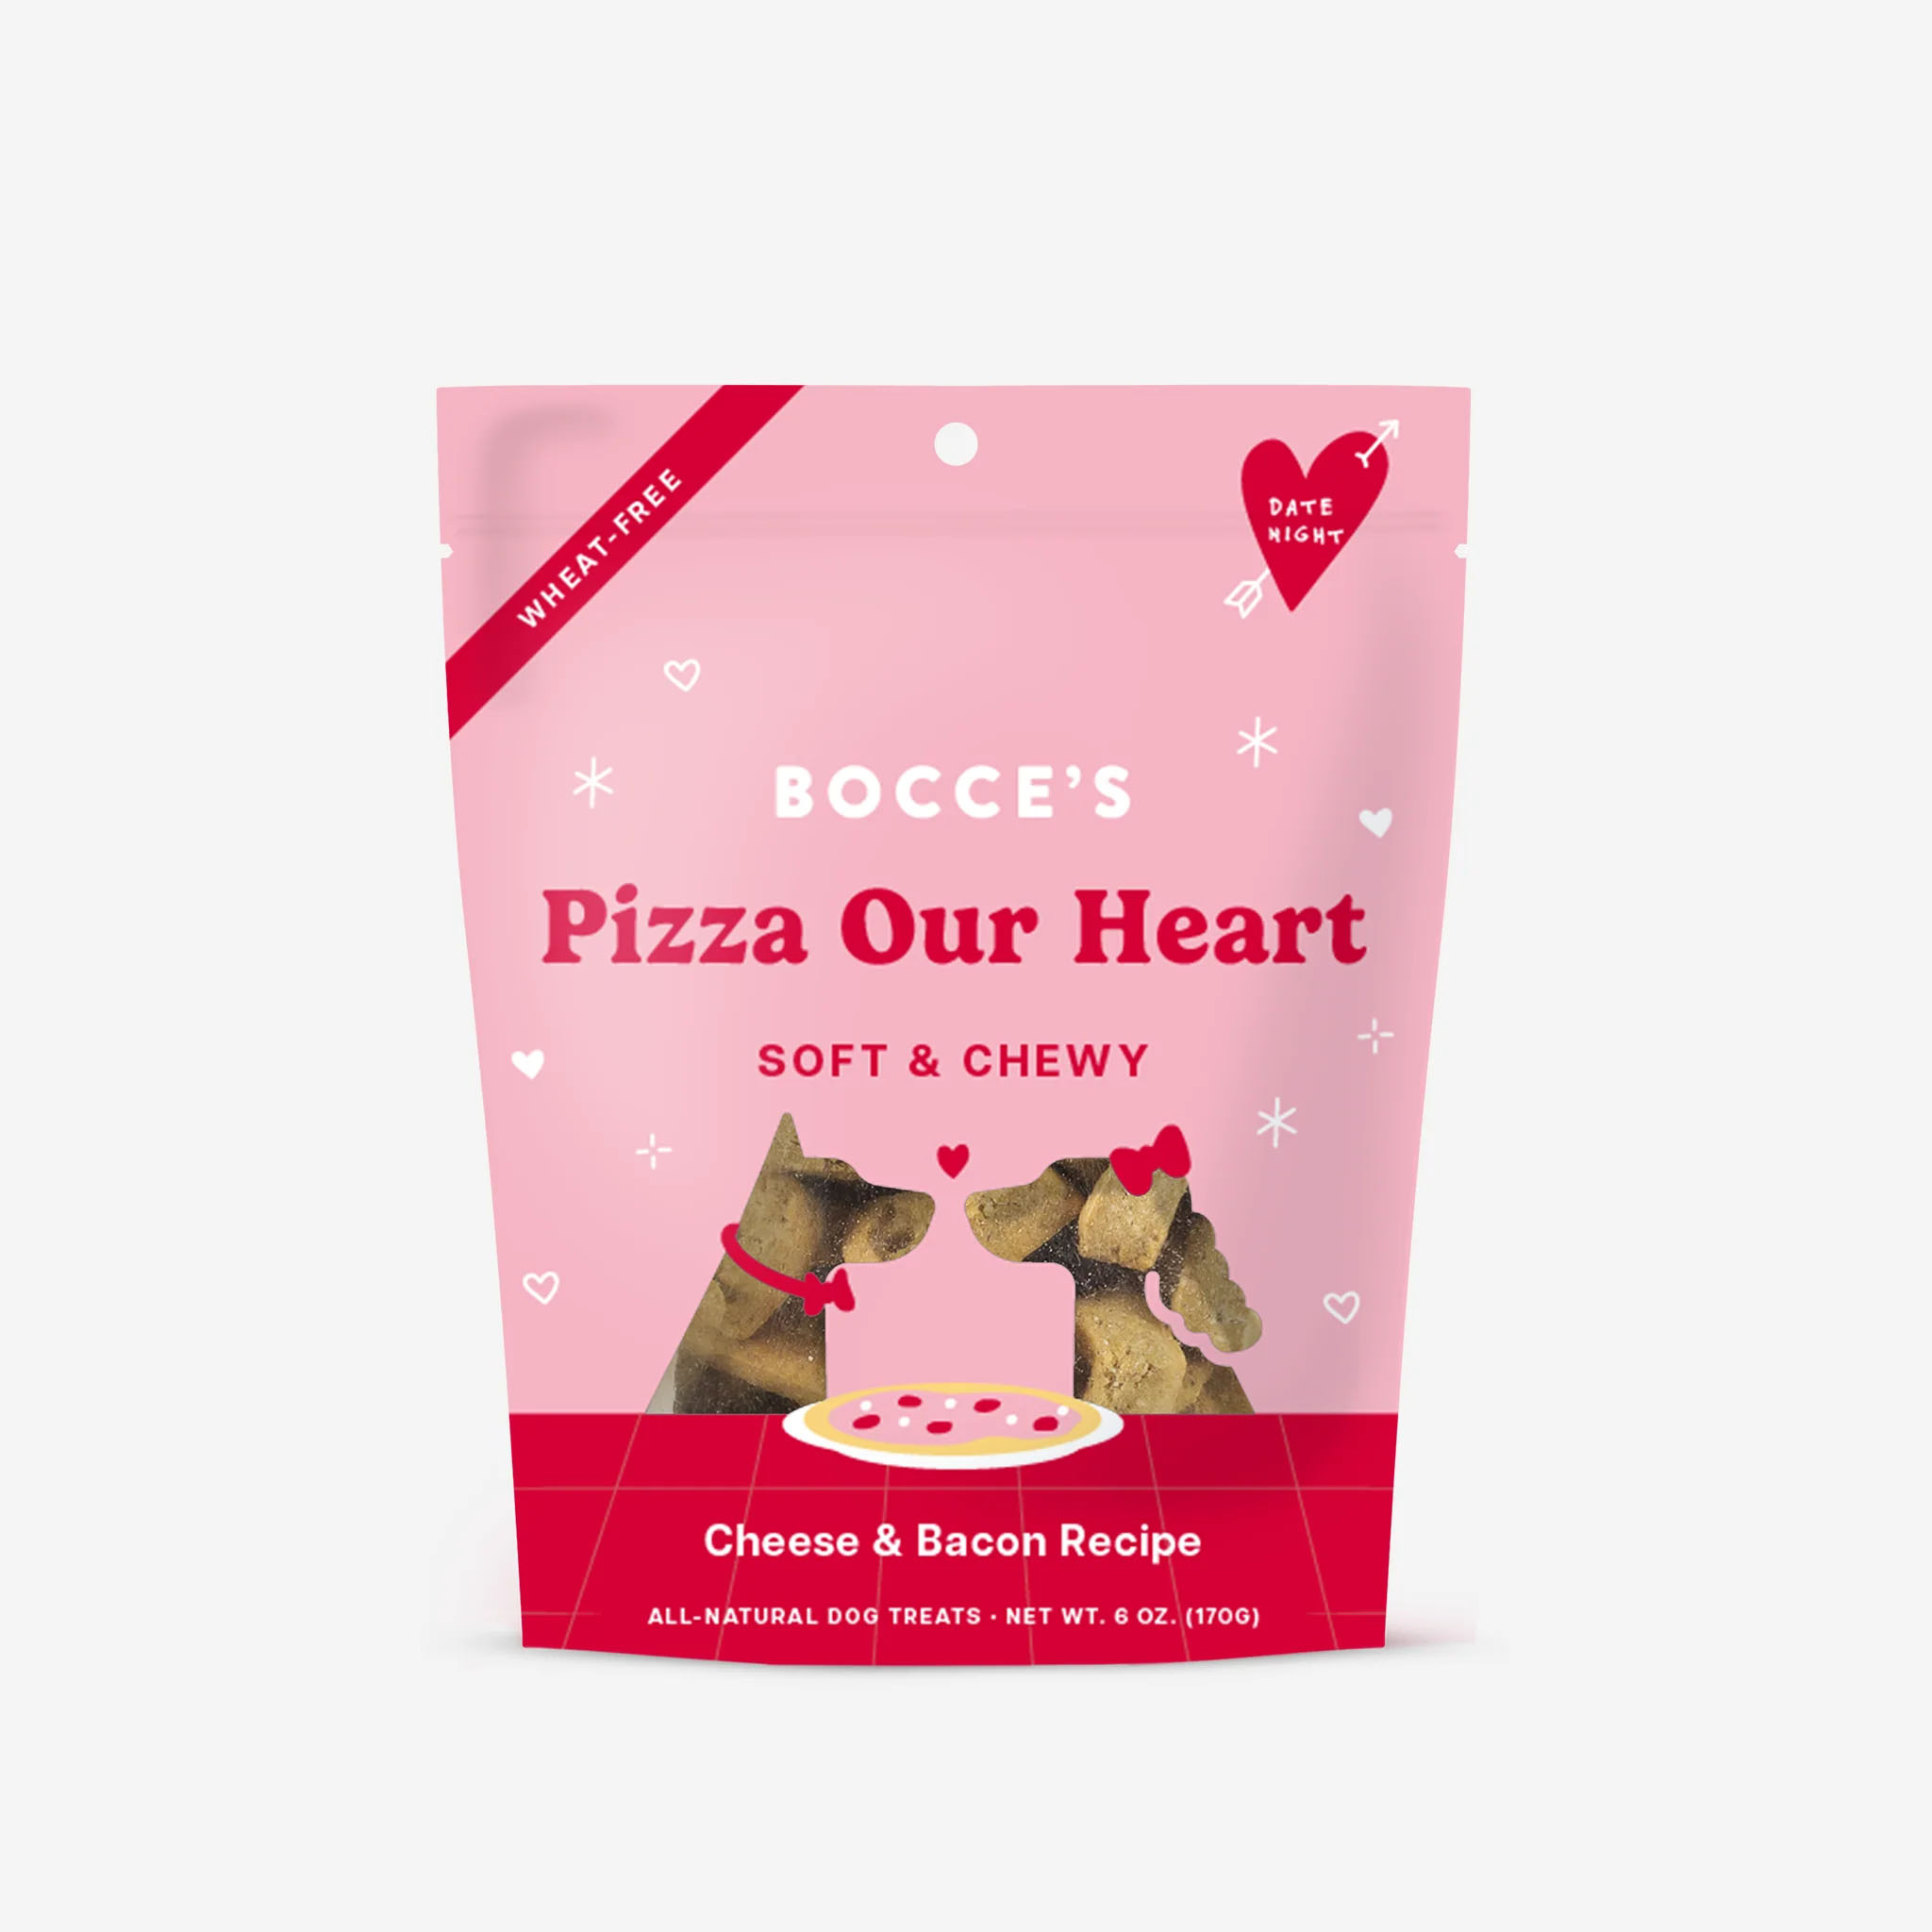 Bocce's Pizza Our Heart Soft & Chewy Dog Treats, 6 oz